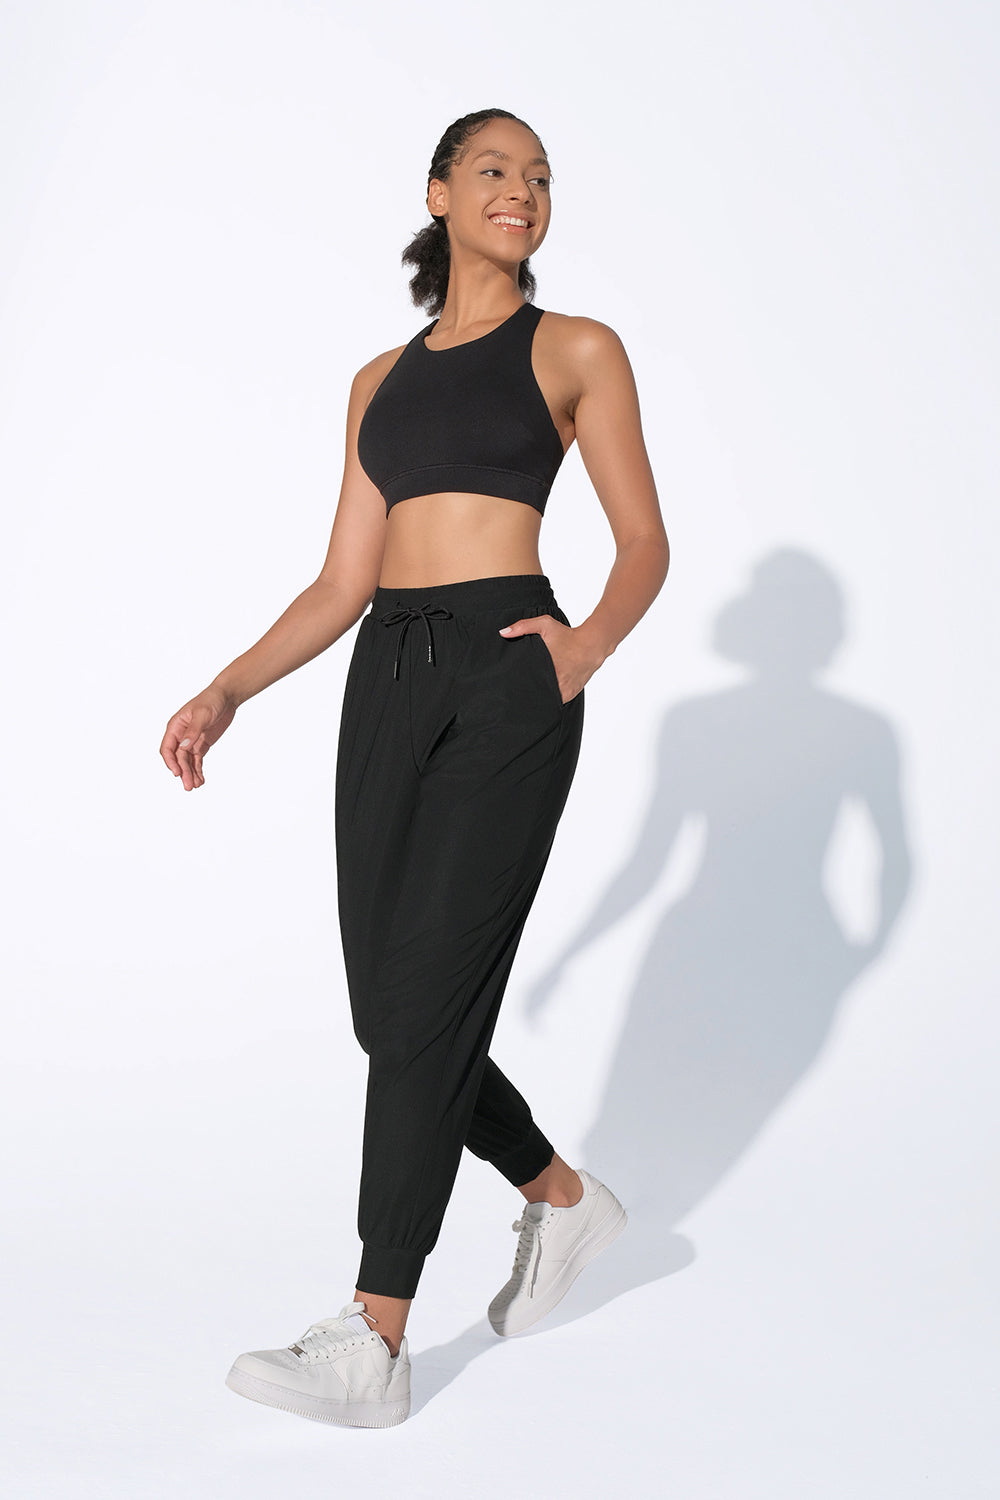 Black Casual Joggers For Running And Hiking (International Shipping)